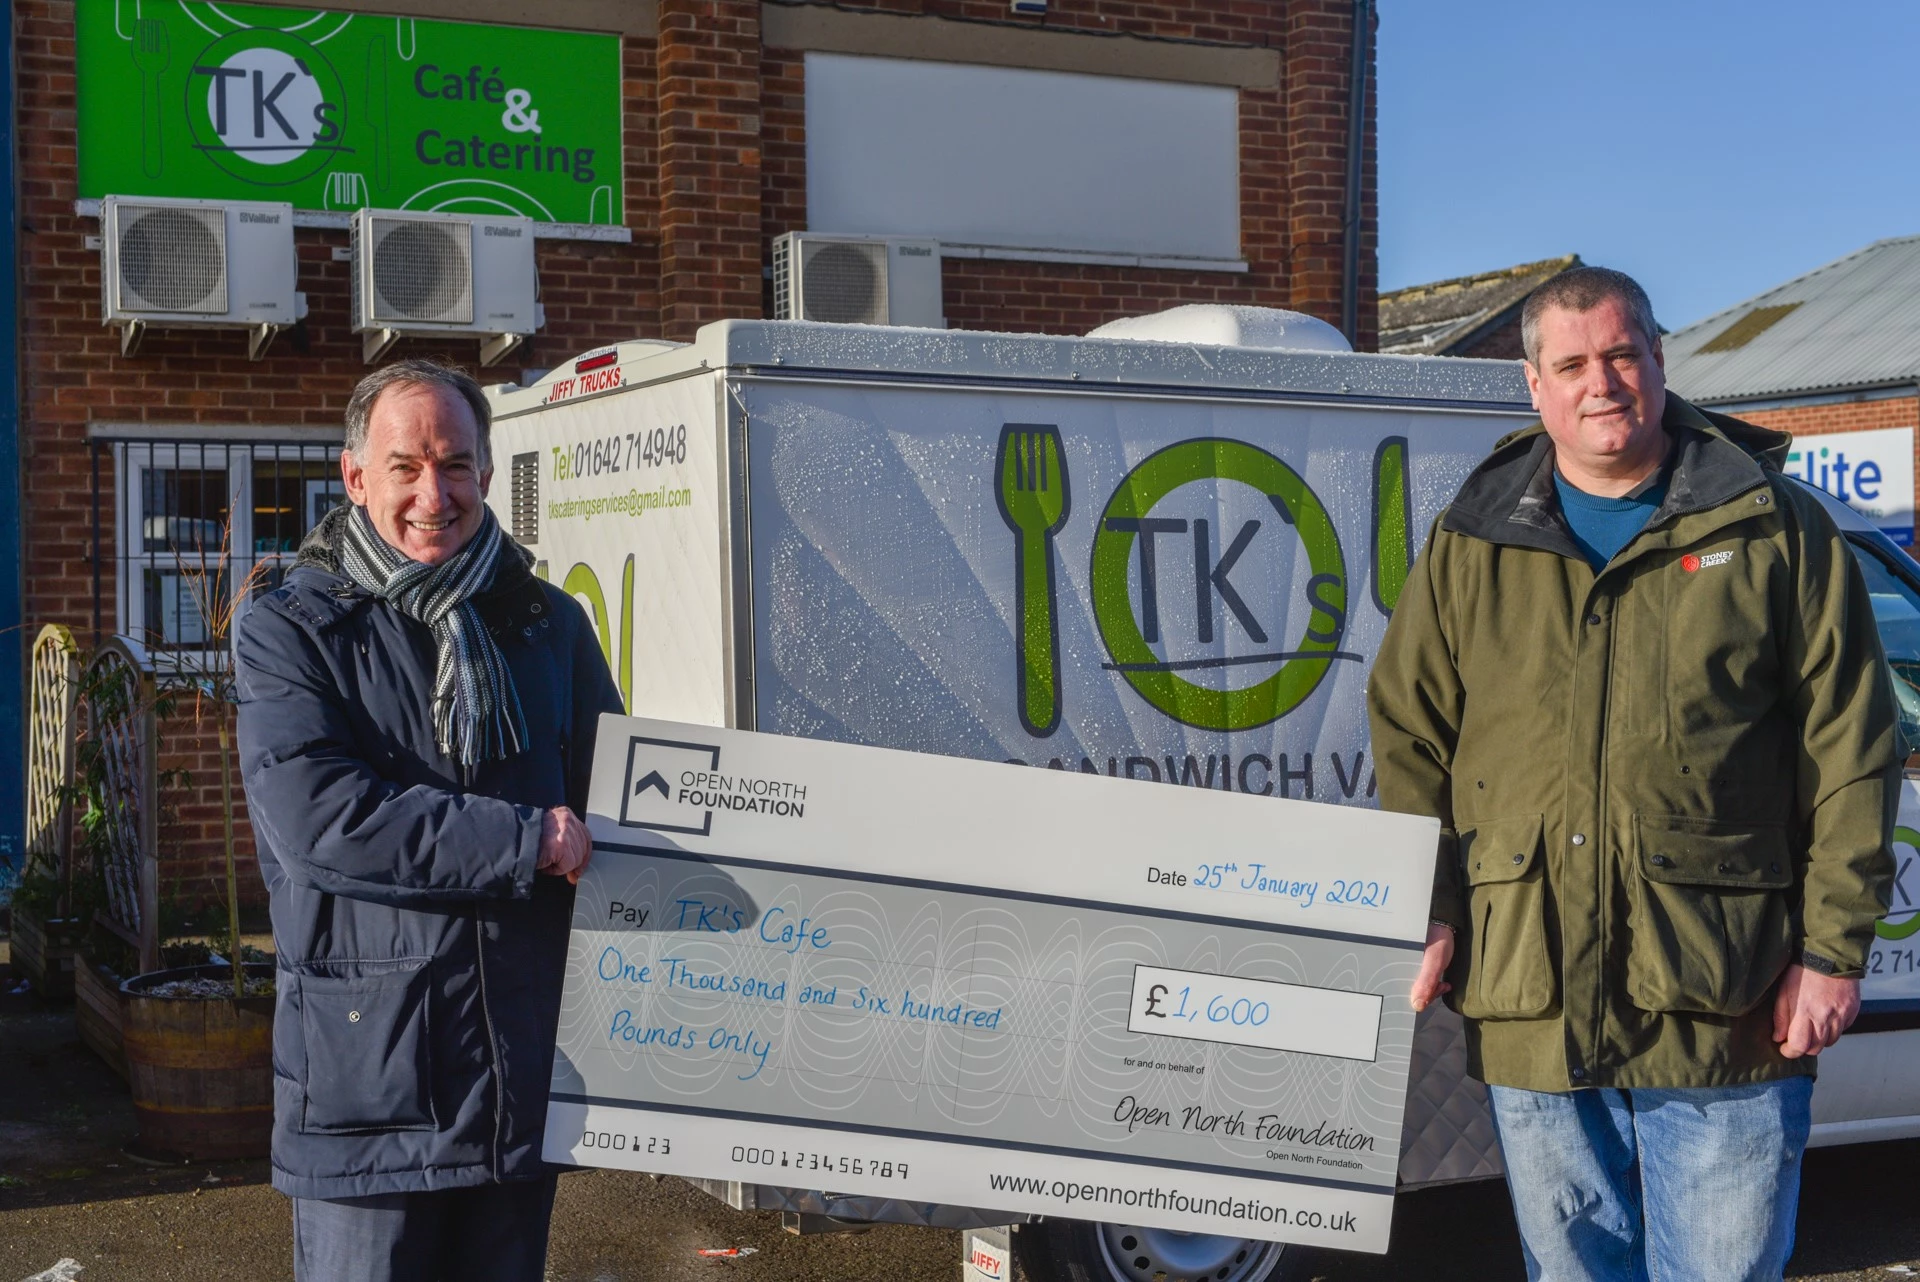 Richard Swart (left) of Open North Foundation with Damon Wright, the owner of Stokesley-based TK’s Café and Catering.